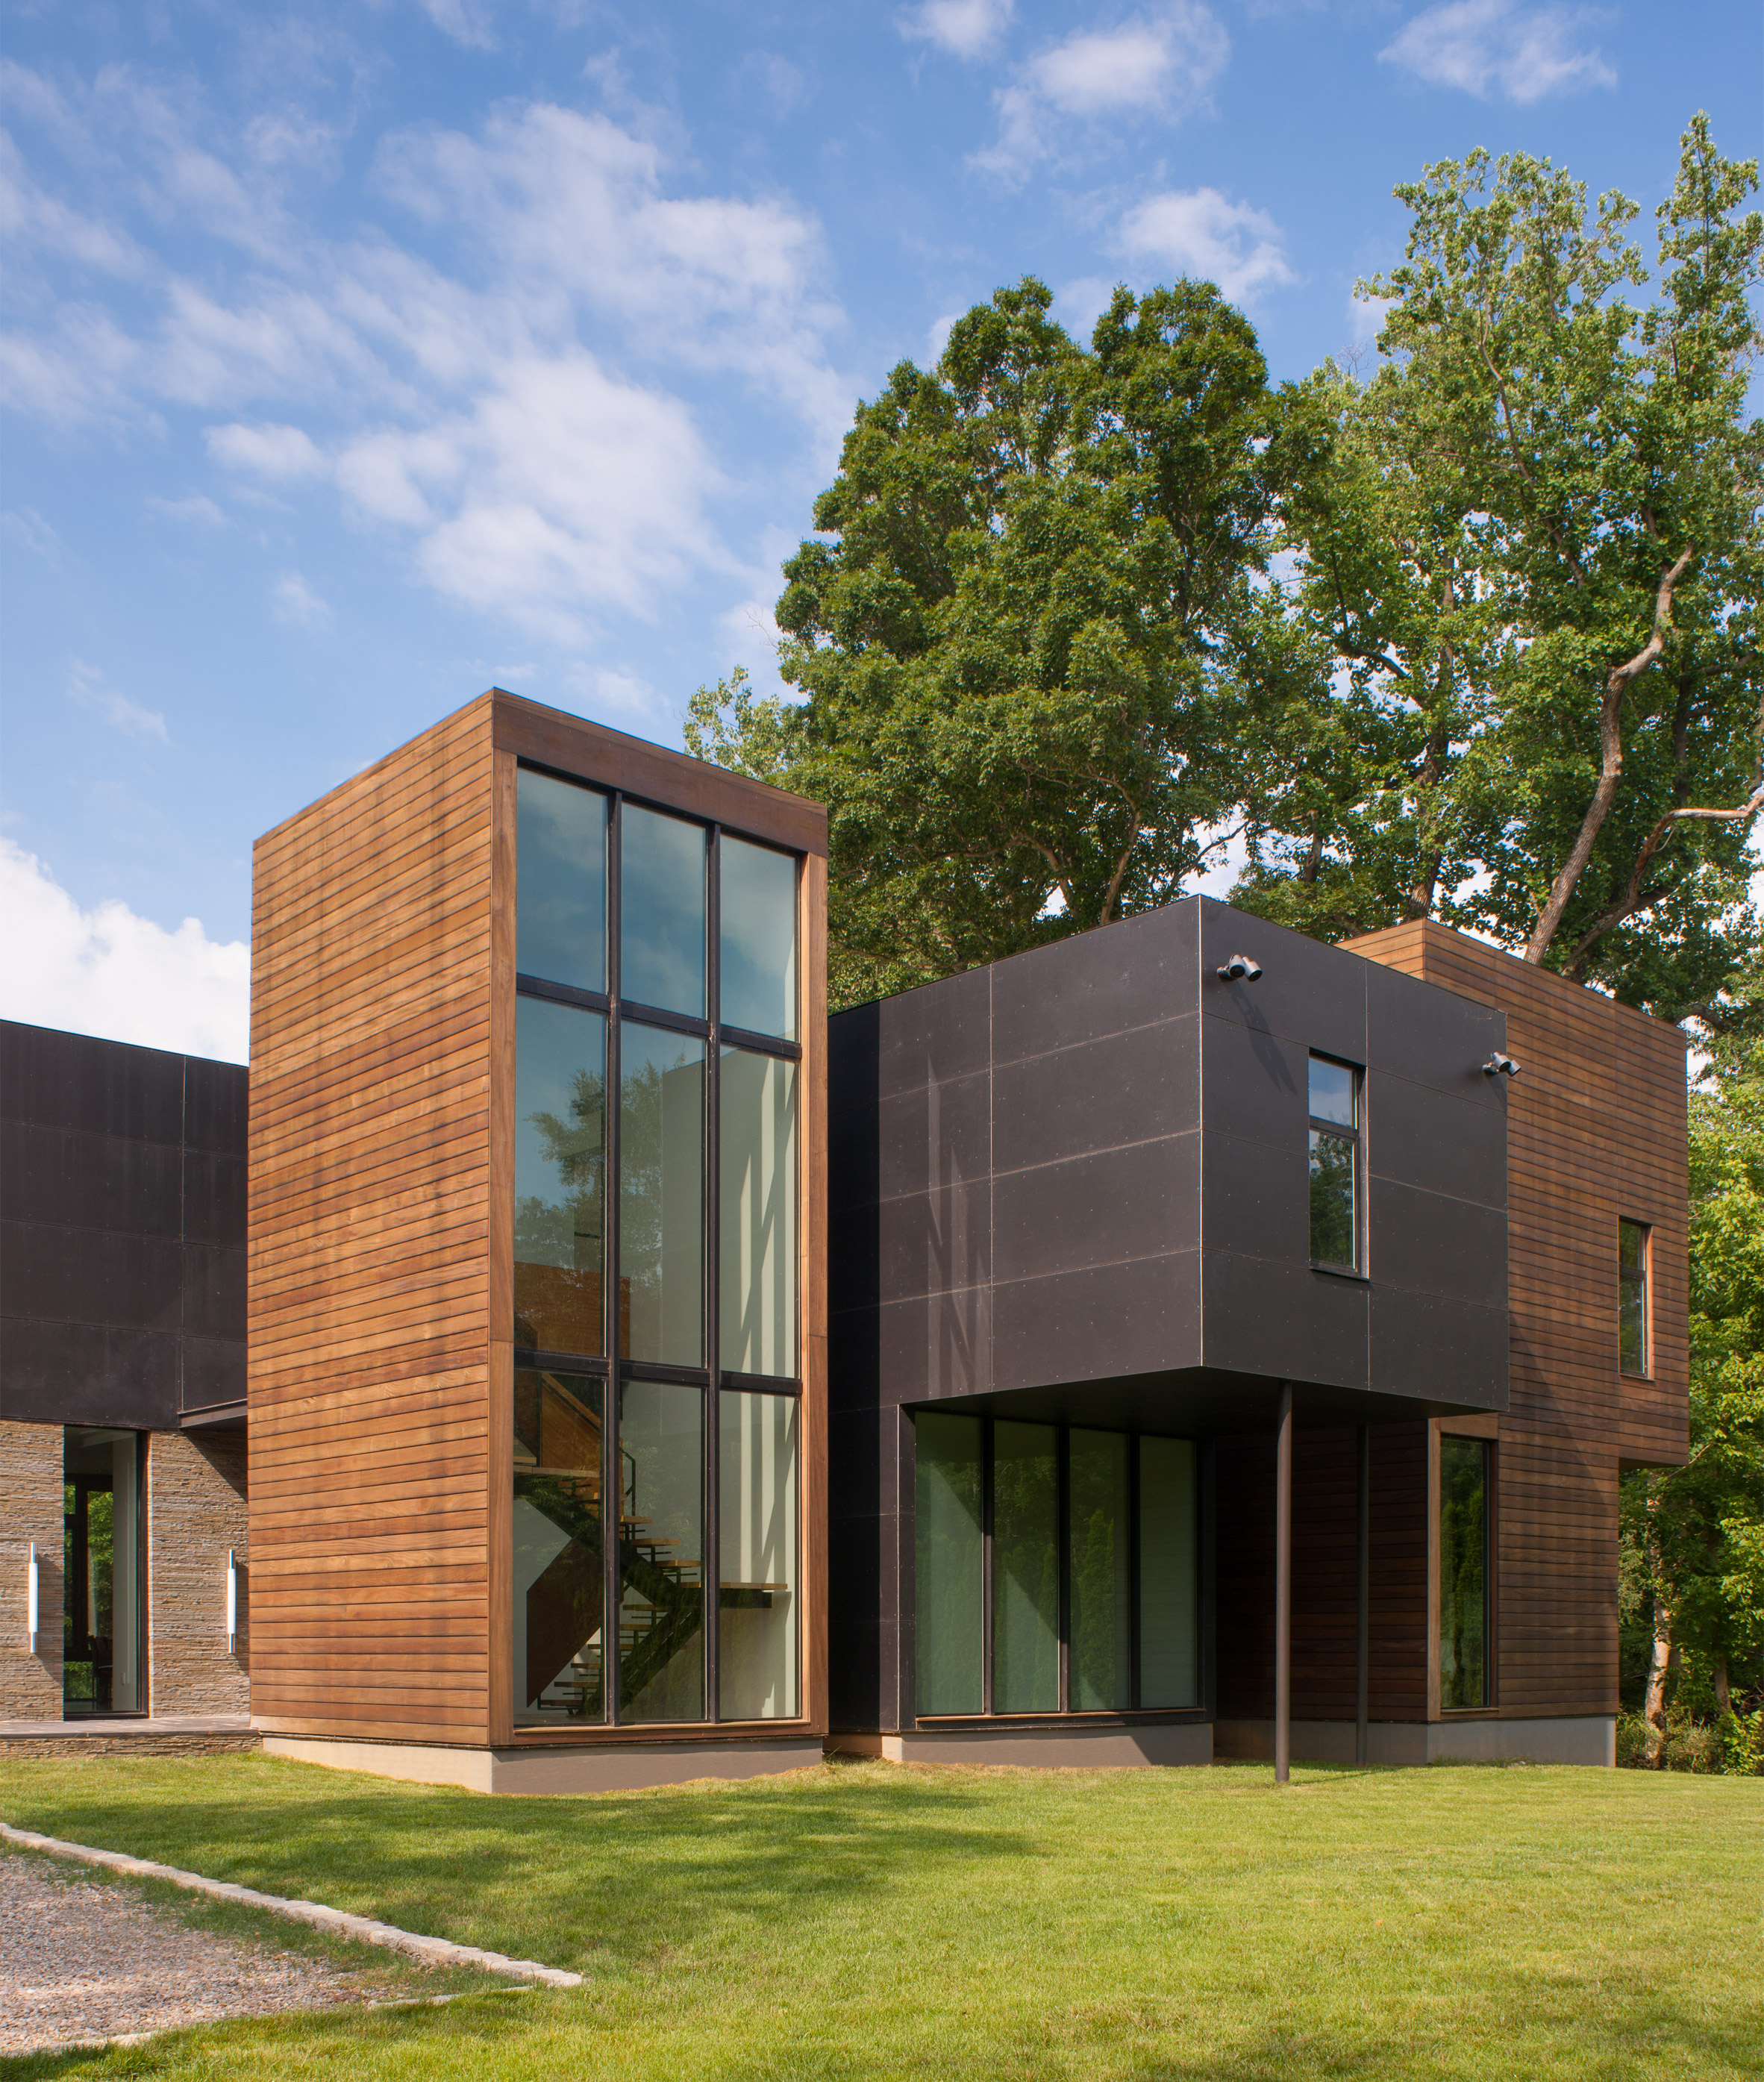 Robert Gurney perches a Maryland home on a ridge overlooking a river